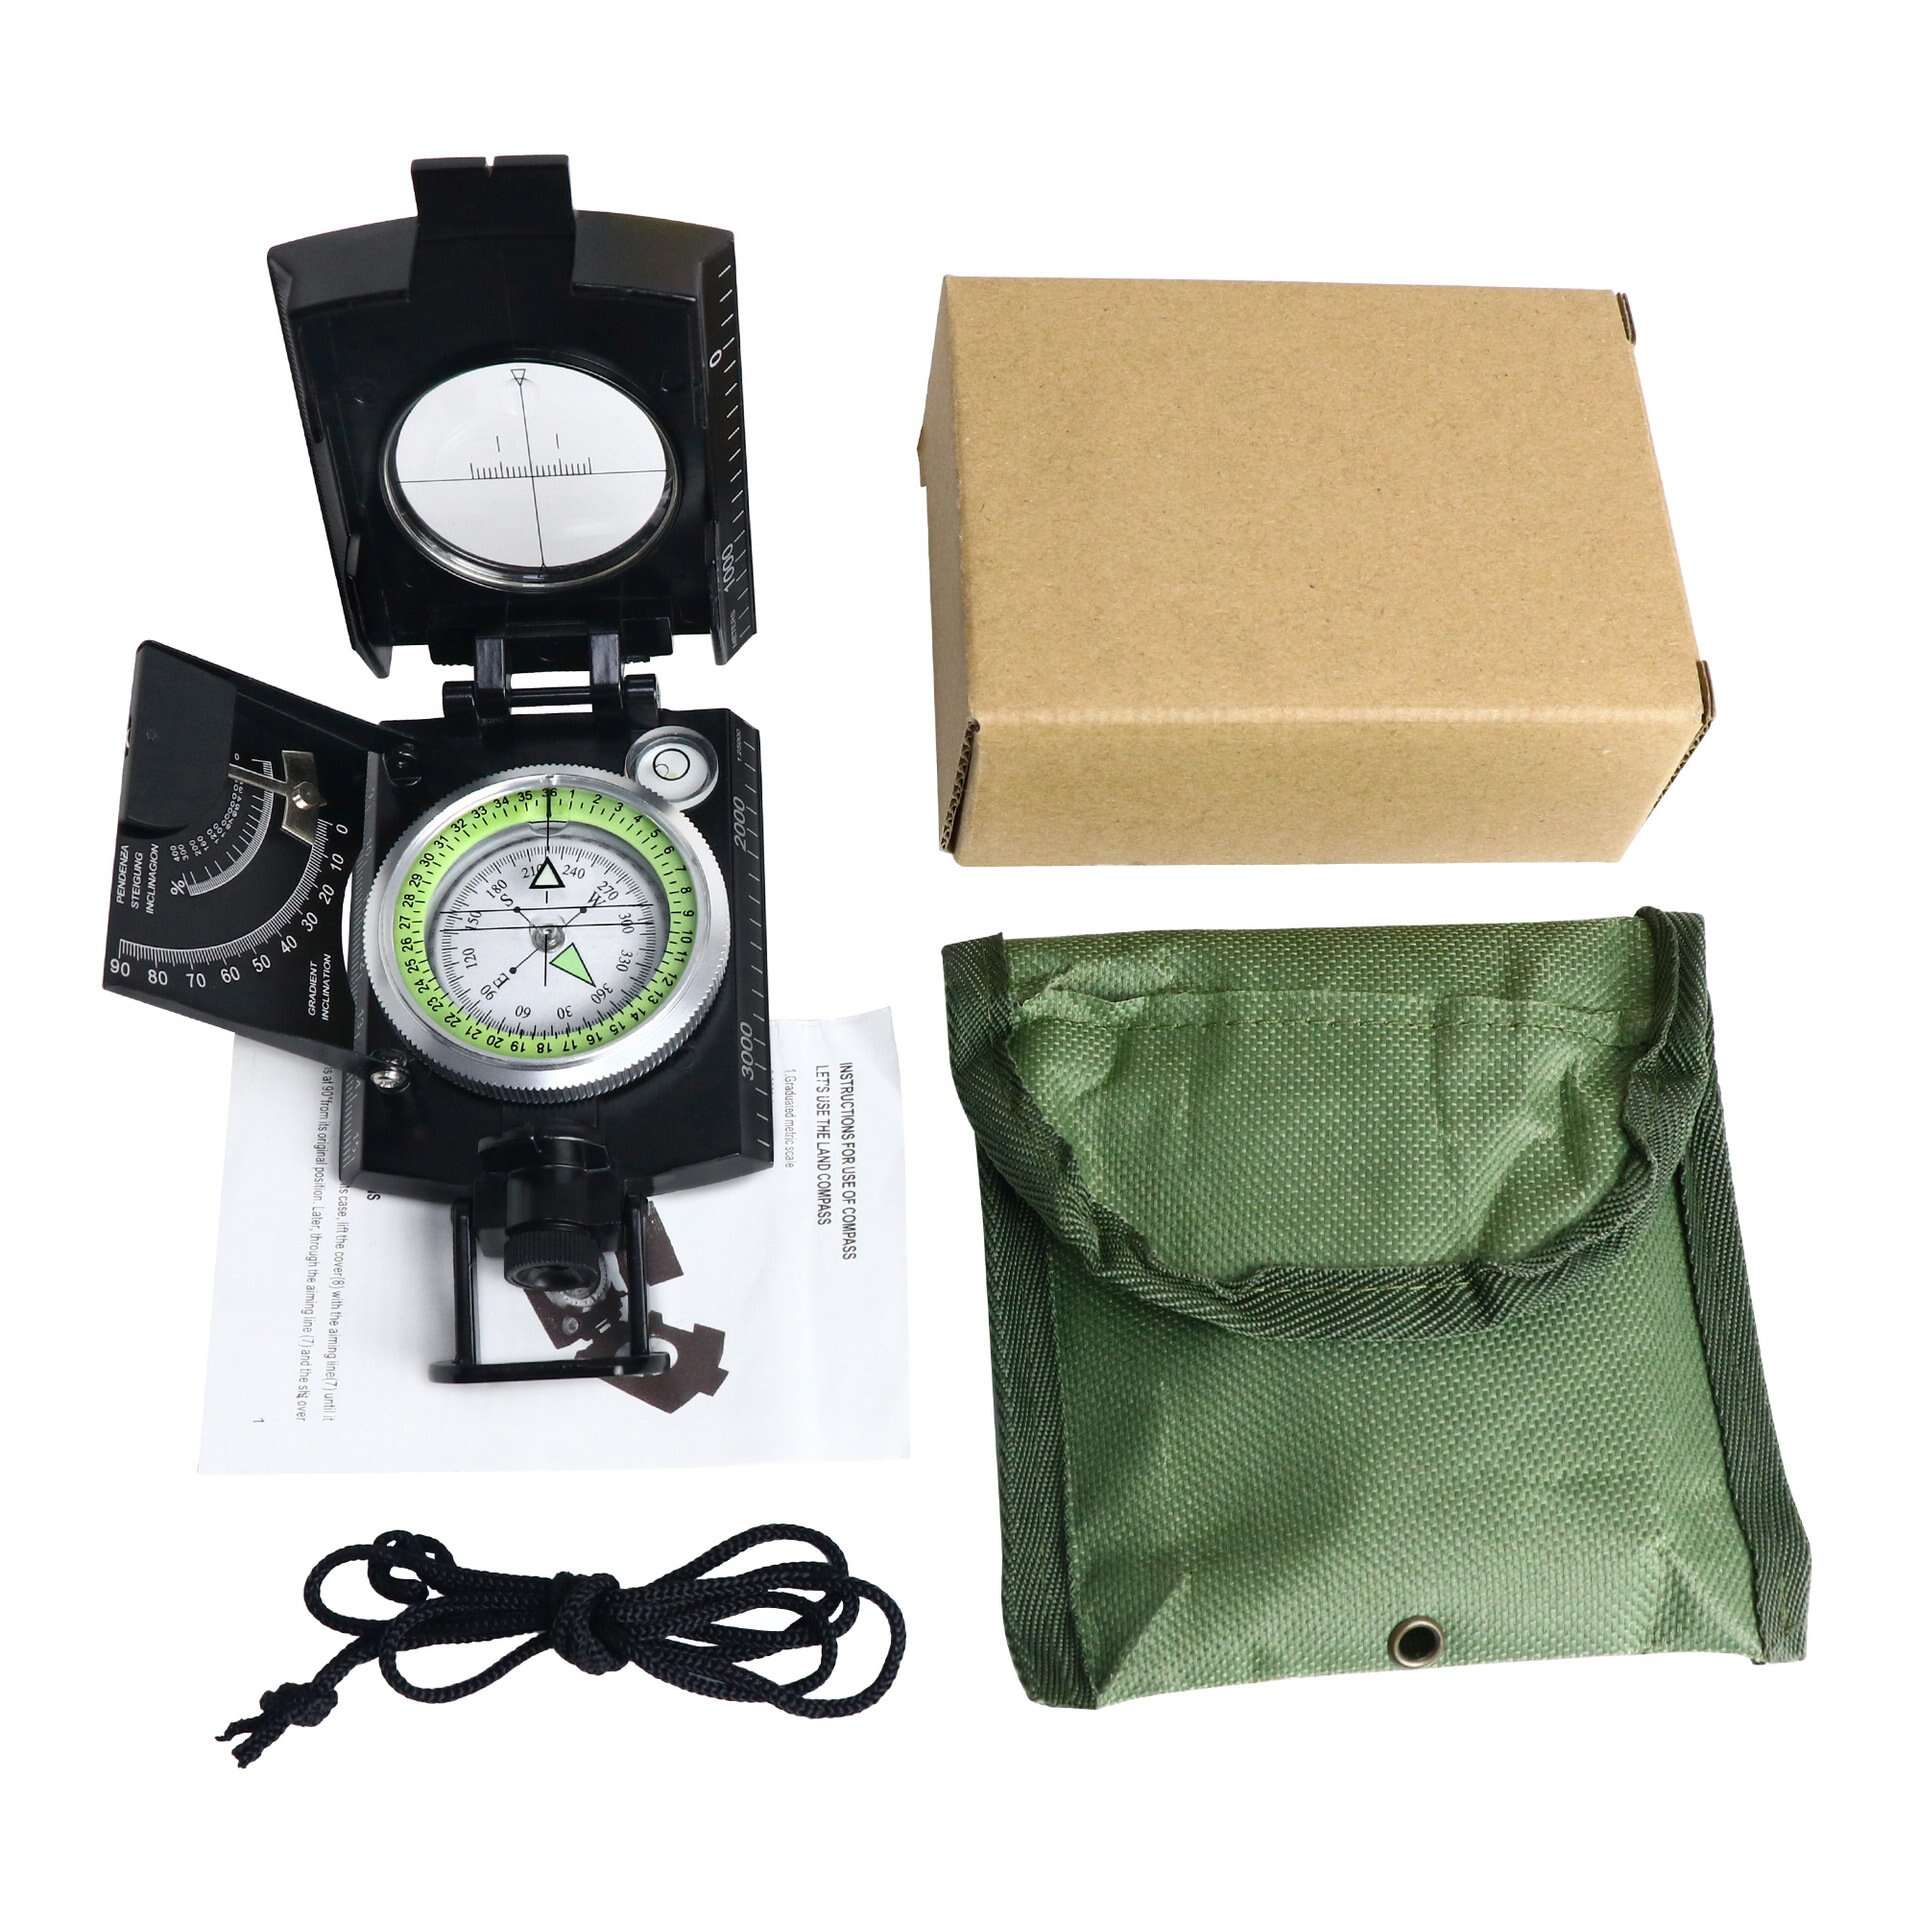 Last Day Special Sale 49% OFF - Multifunctional Military Aiming Navigation Compass